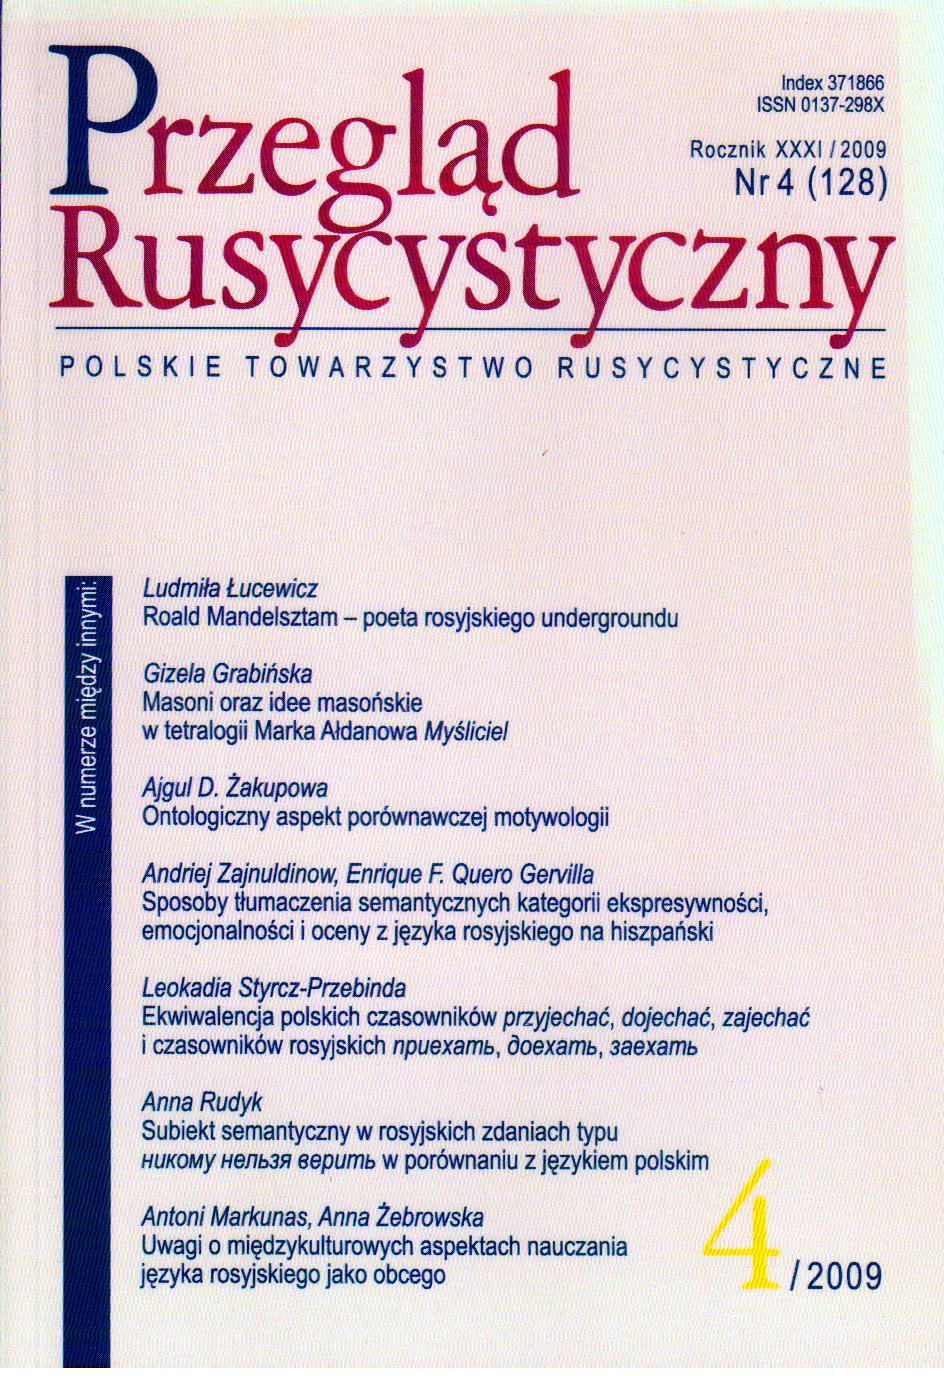 Semantic subject in the Russian sentences of the type никому нельзя верить compared with Polish ones Cover Image